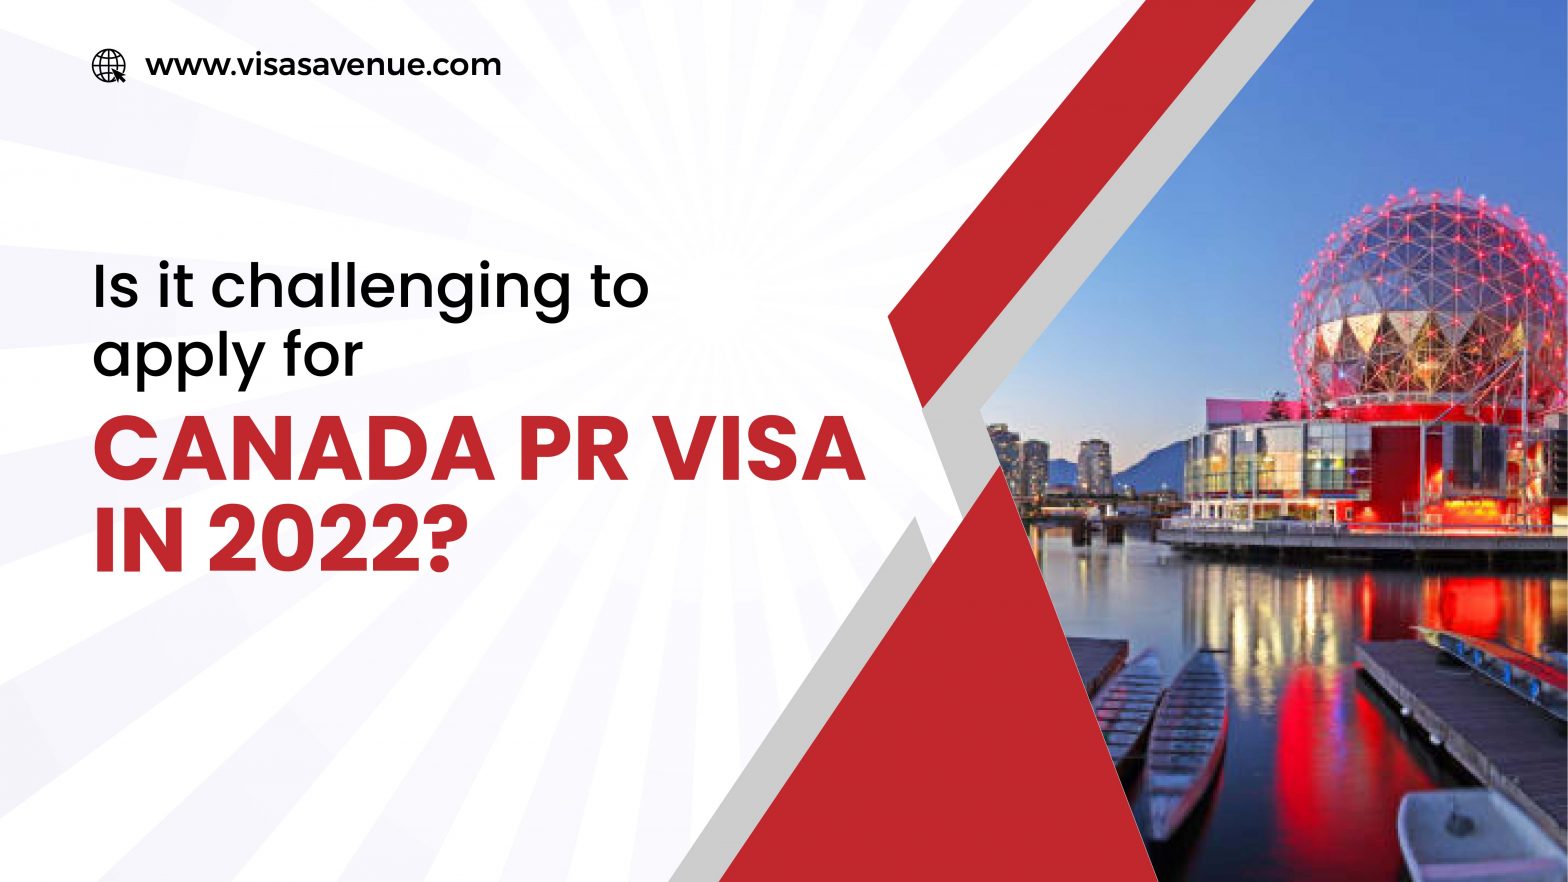 Is it challenging to apply for Canada PR Visa in 2022